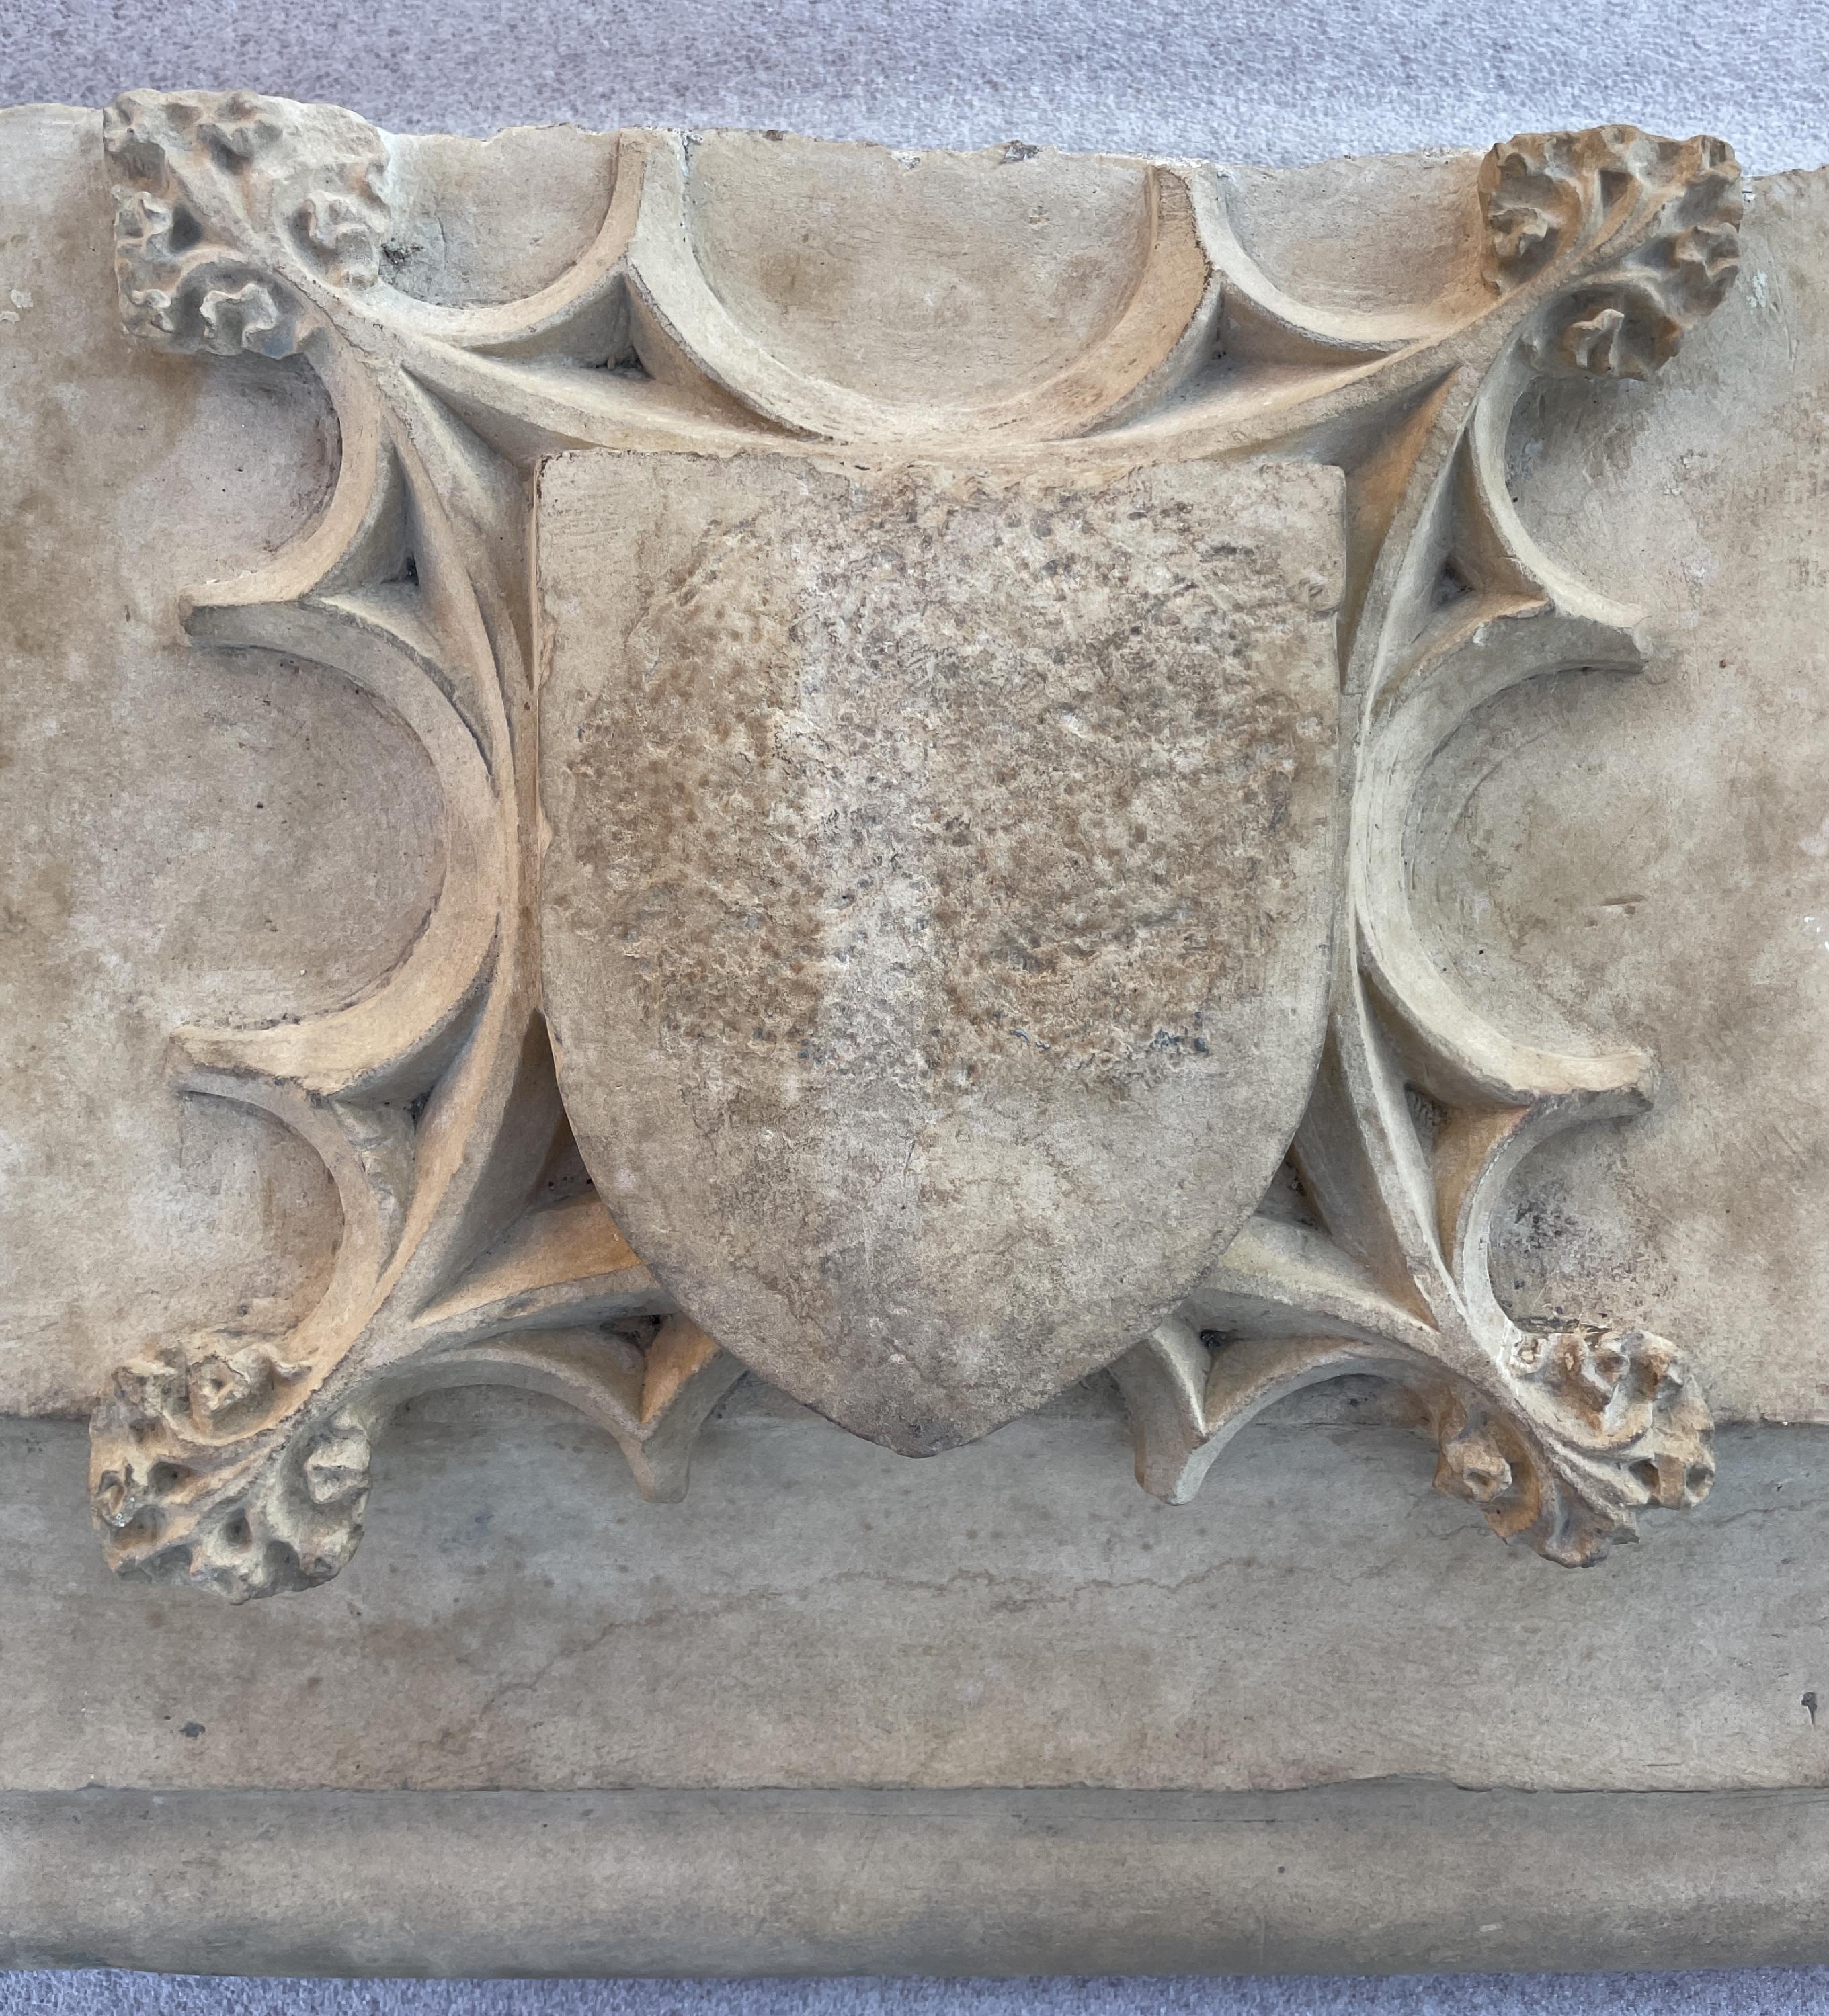 This monumental mantel was made of stone in the 17th century.
Its moulded entablature, adorned with a crest in a Gothic inspired decor, comes in projection from the jambs.